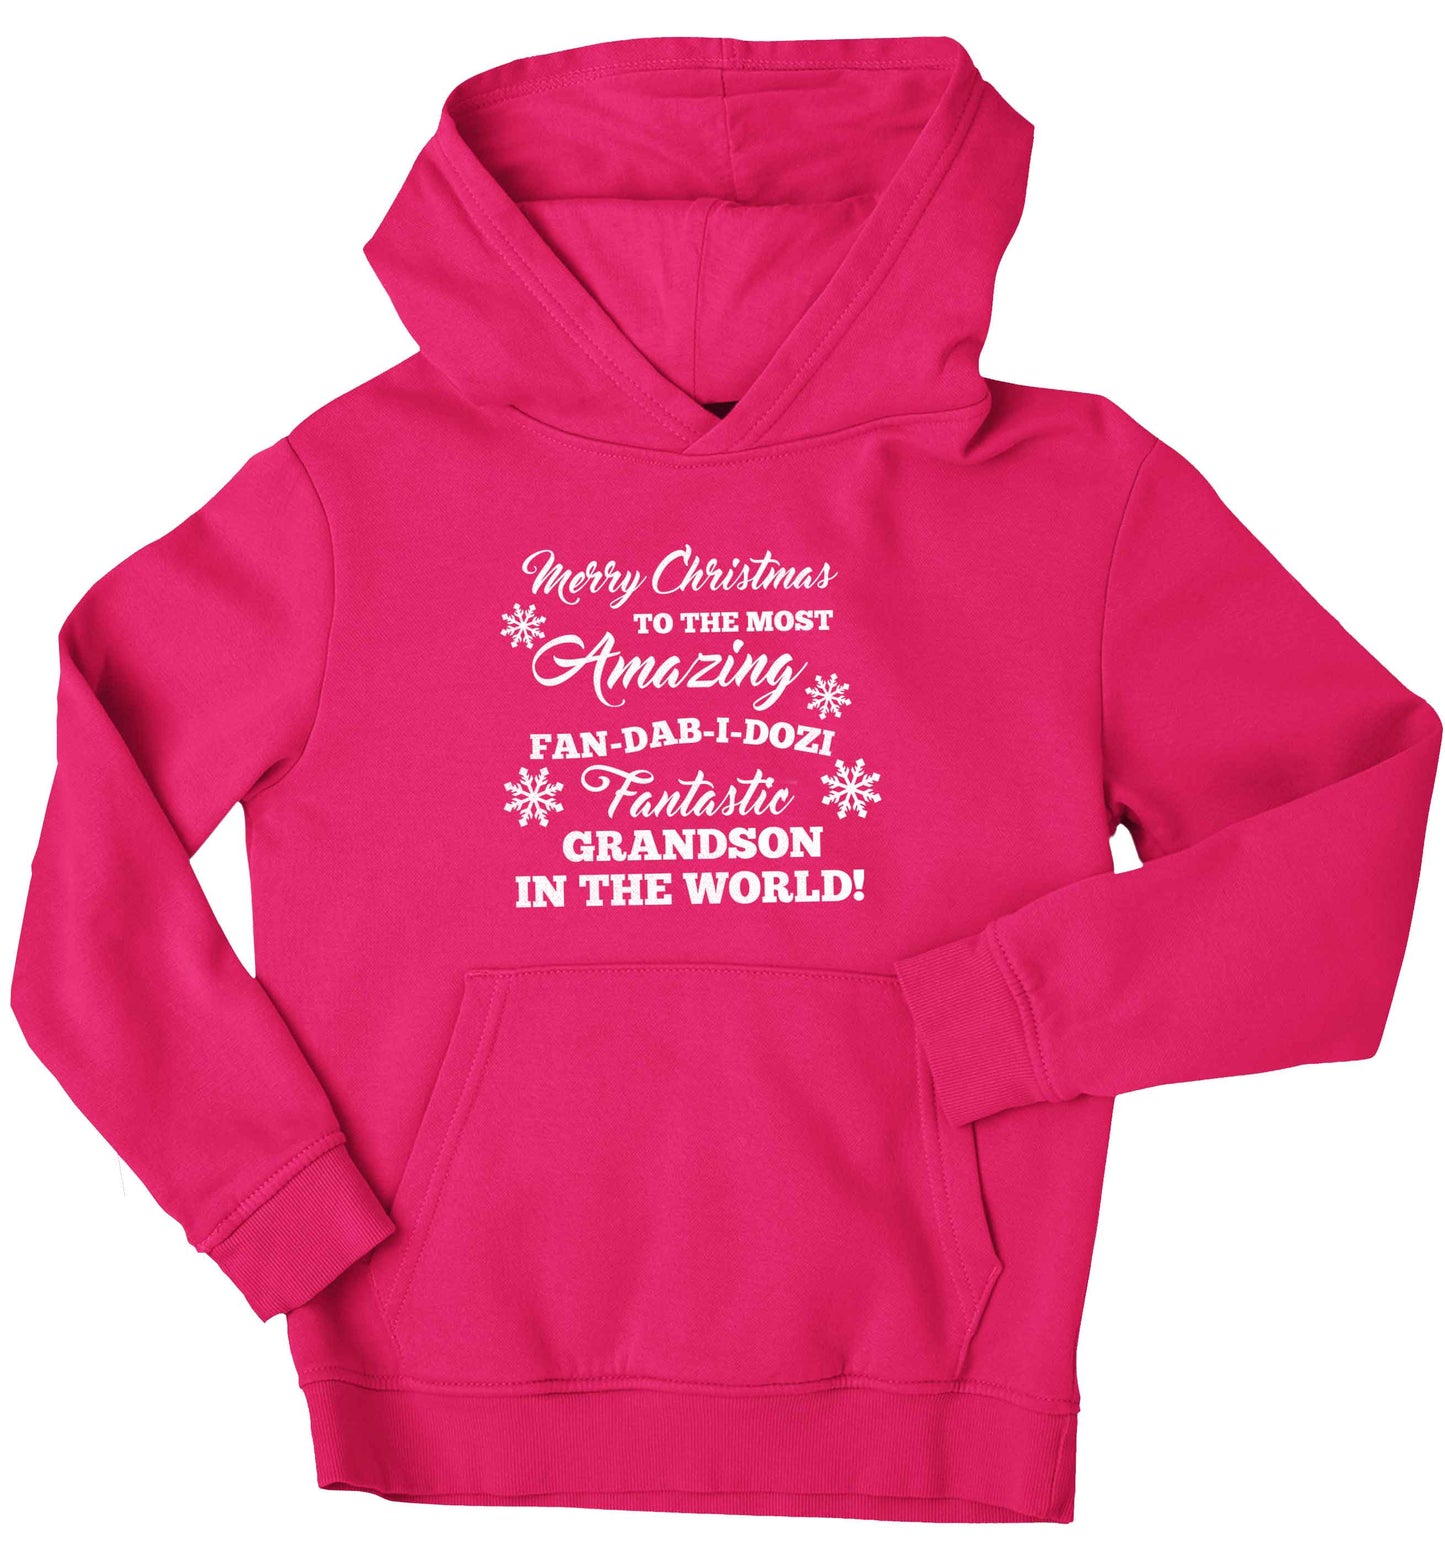 Merry Christmas to the most amazing fan-dab-i-dozi fantasic Grandson in the world children's pink hoodie 12-13 Years